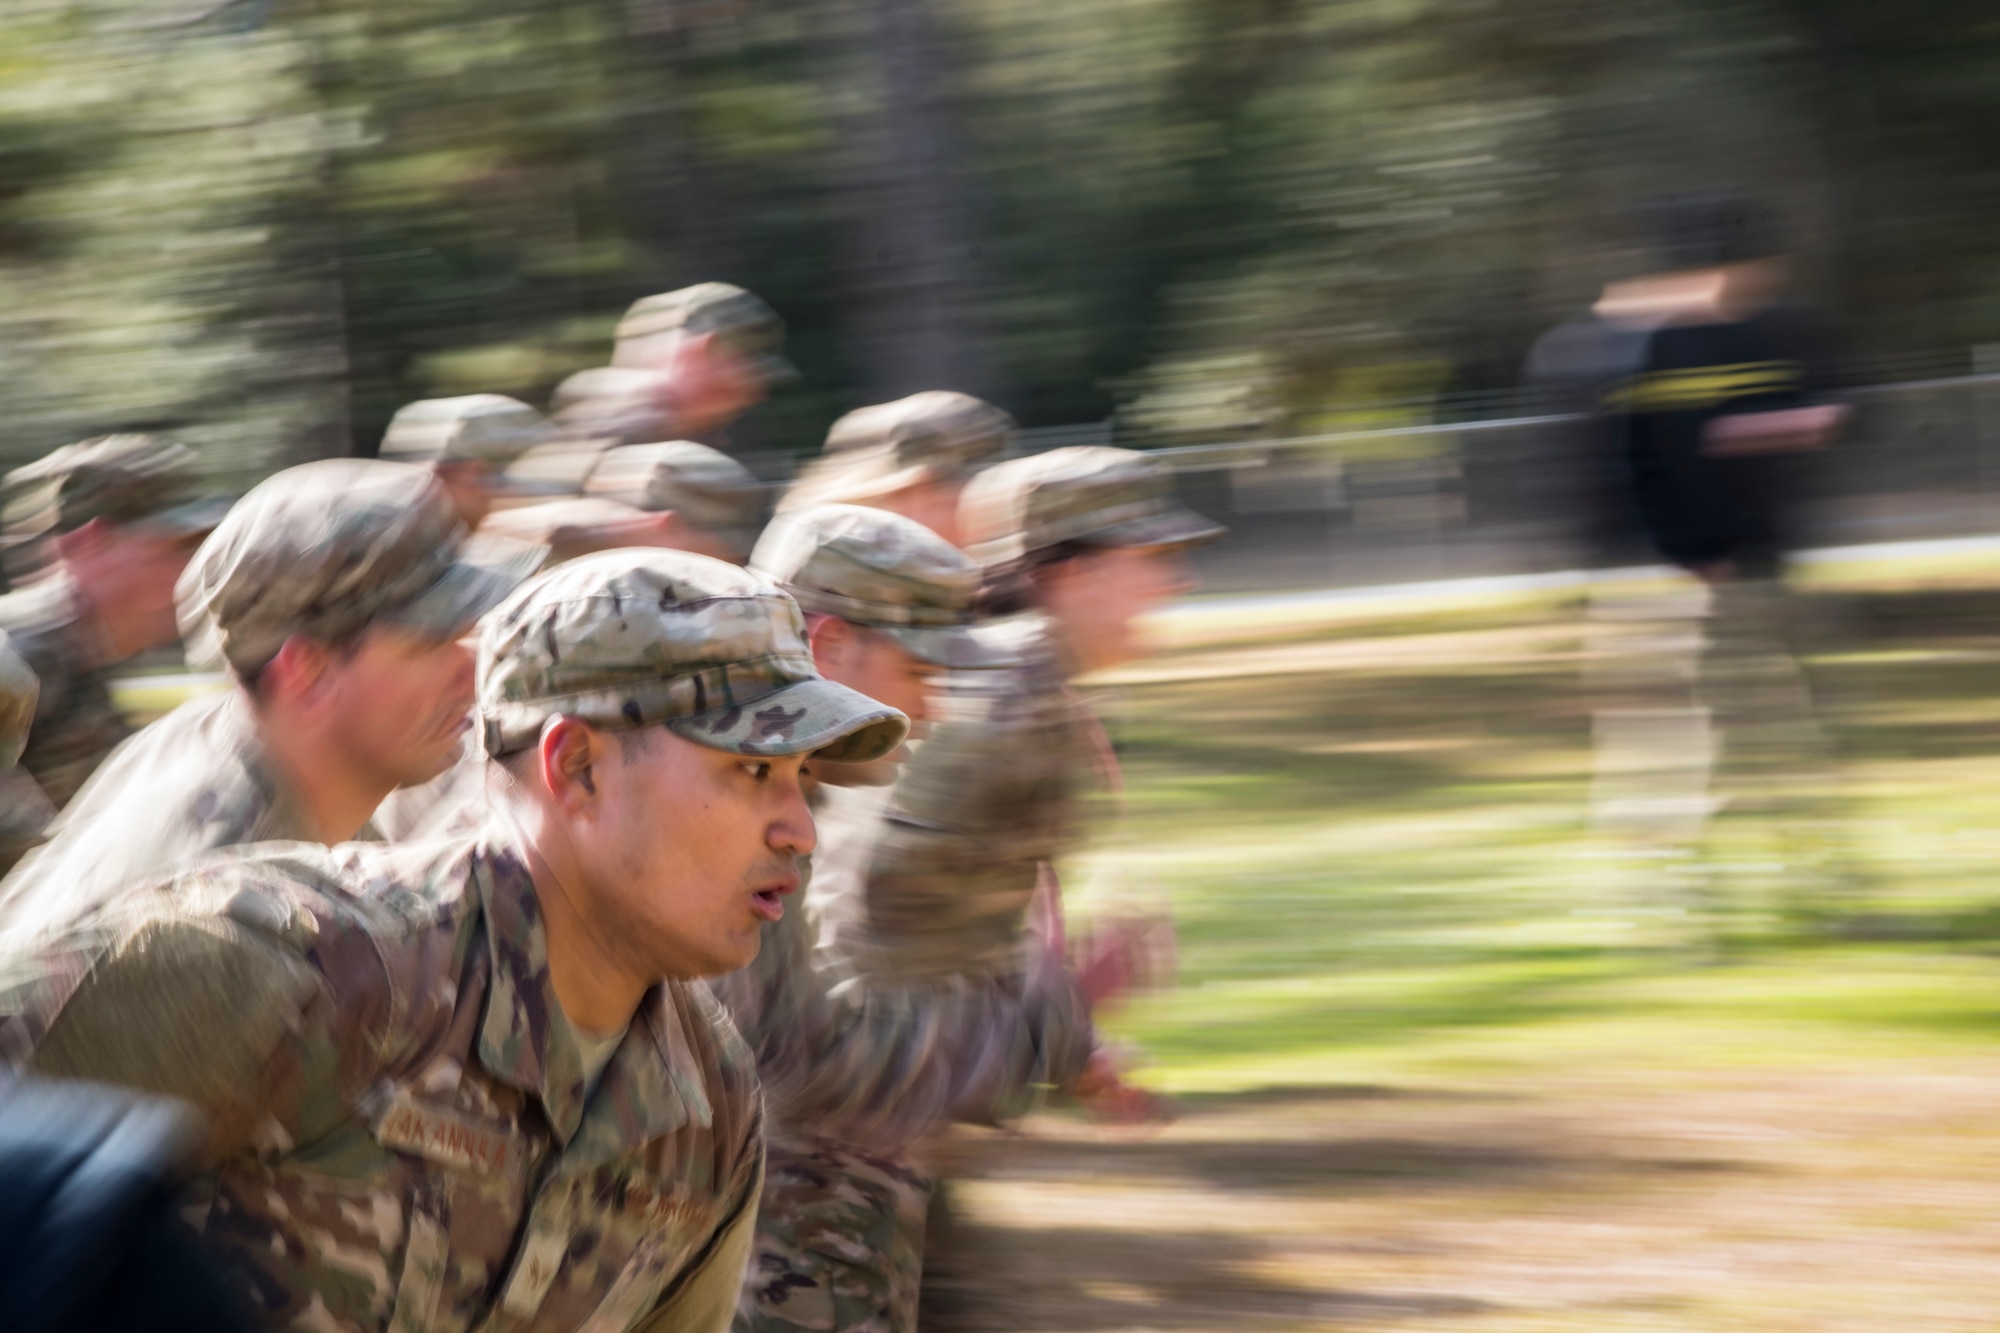 Airmen sprint during an Army Air Assault Assessment, Jan. 30, 2019, at Camp Blanding, Fla. Throughout the assessment, airmen competed amongst themselves to demonstrate their overall readiness for Army Air Assault School. (U.S. Air Force photo by Airman First Class Eugene Oliver)